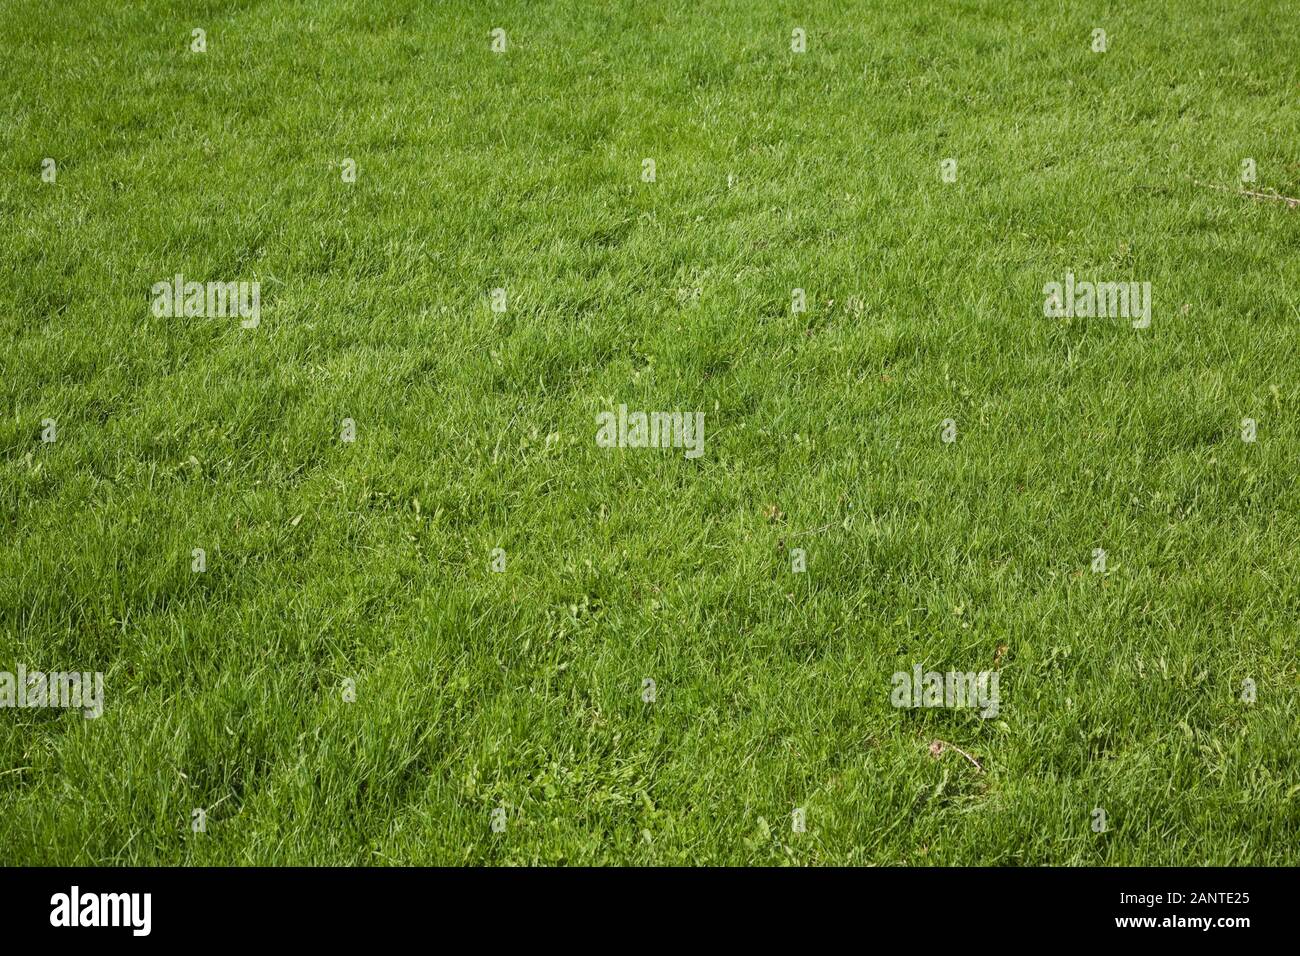 Close-up of cool green grass lawn with mix of Lolium perenne - Perennial Rye grass, Agrostis palustris - Creeping bentgrass, Festuca arundinacea Stock Photo